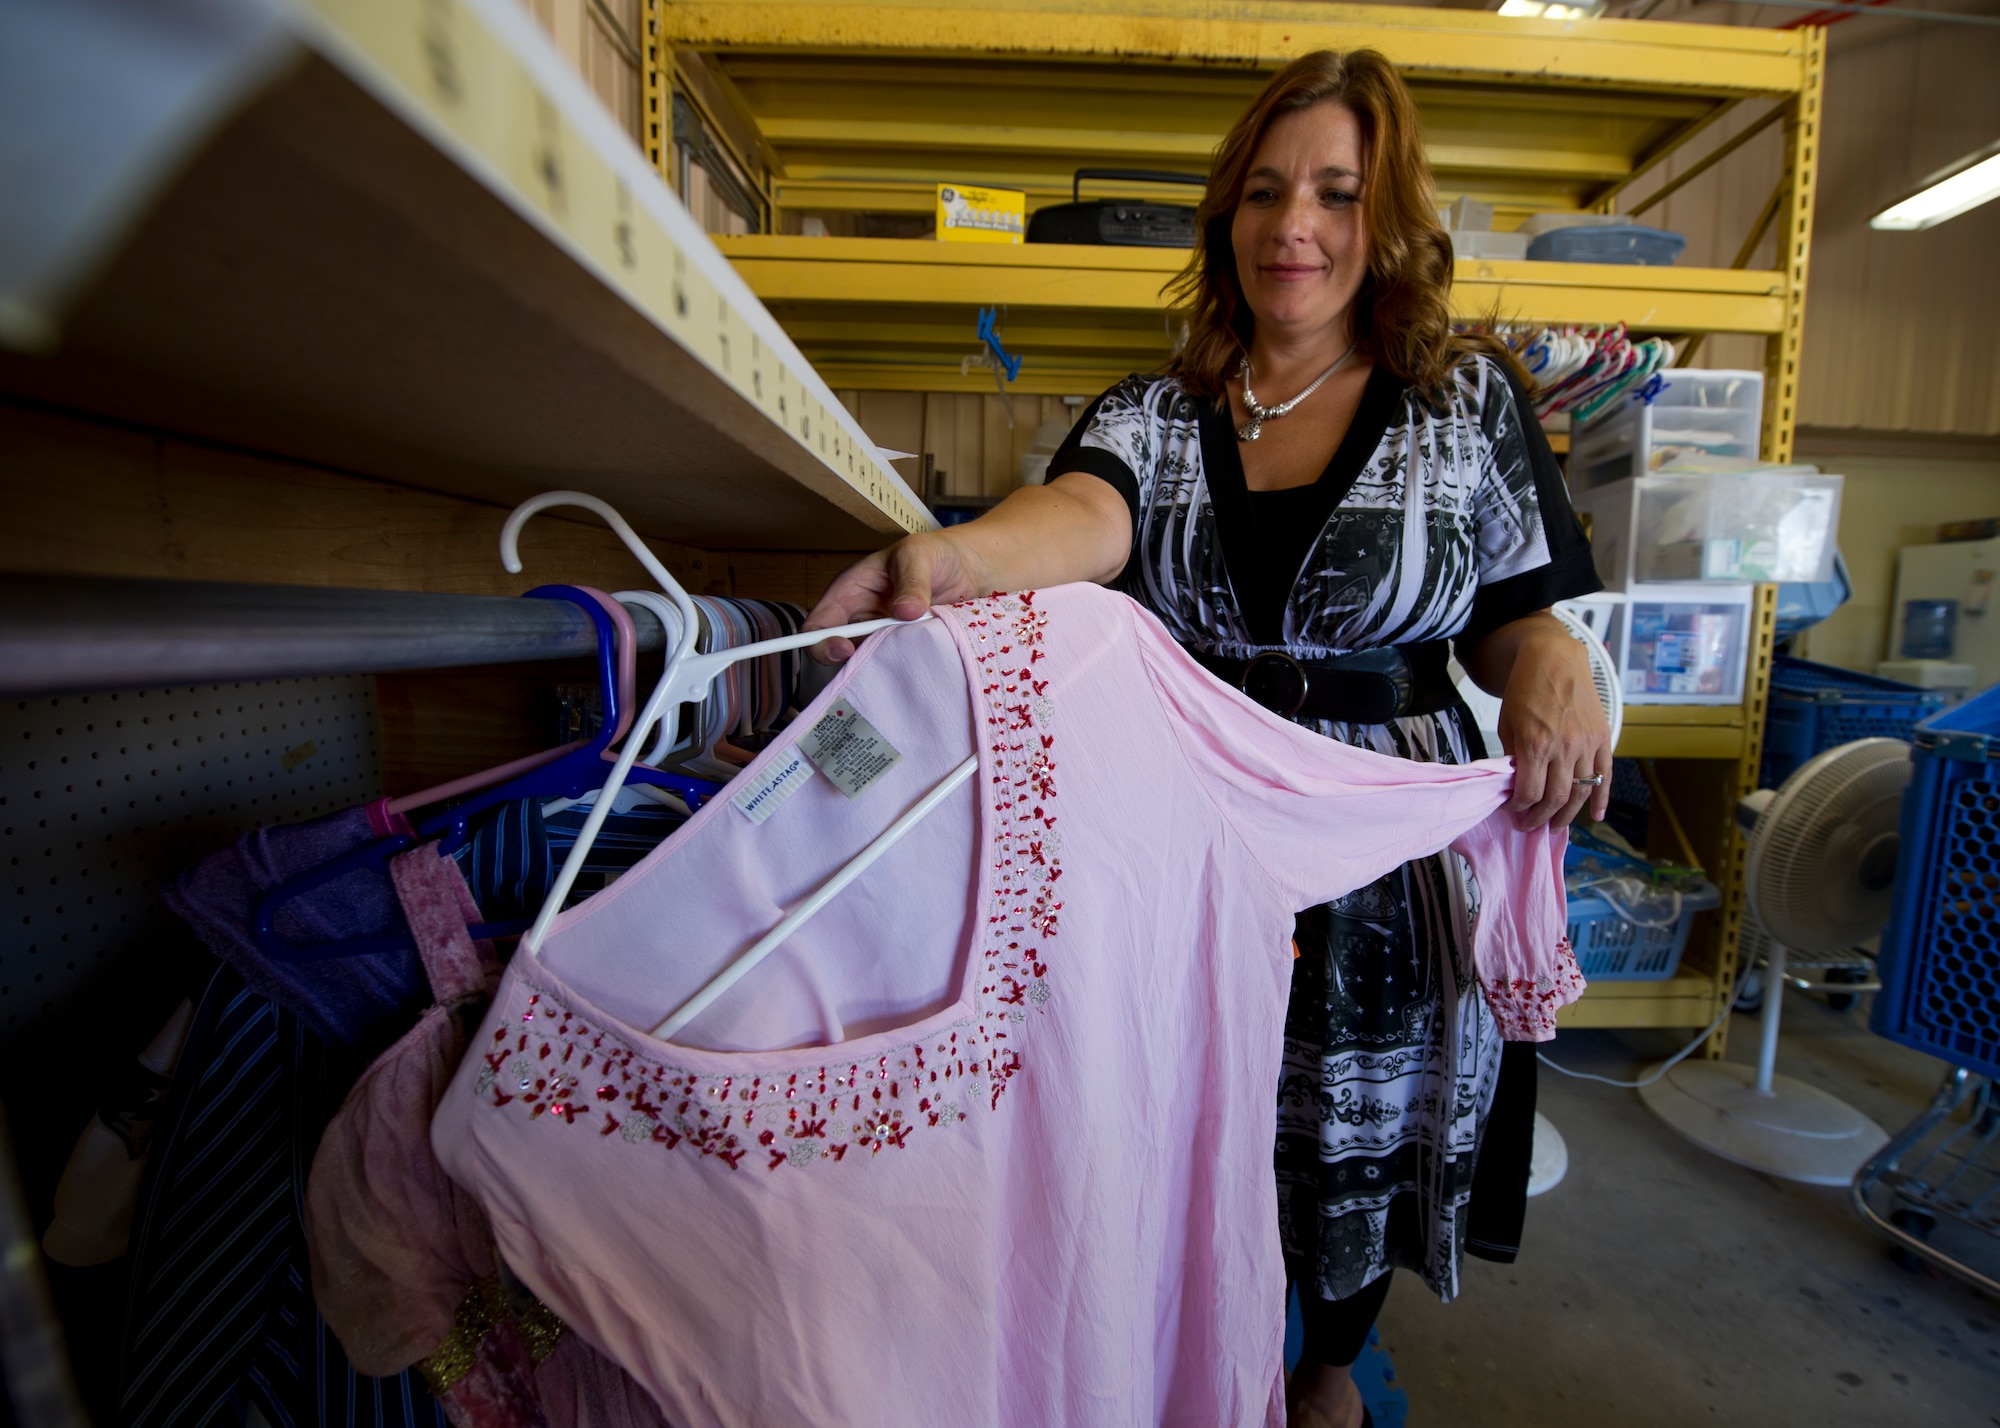 Thrift Store reopens its doors > Holloman Air Force Base > Display